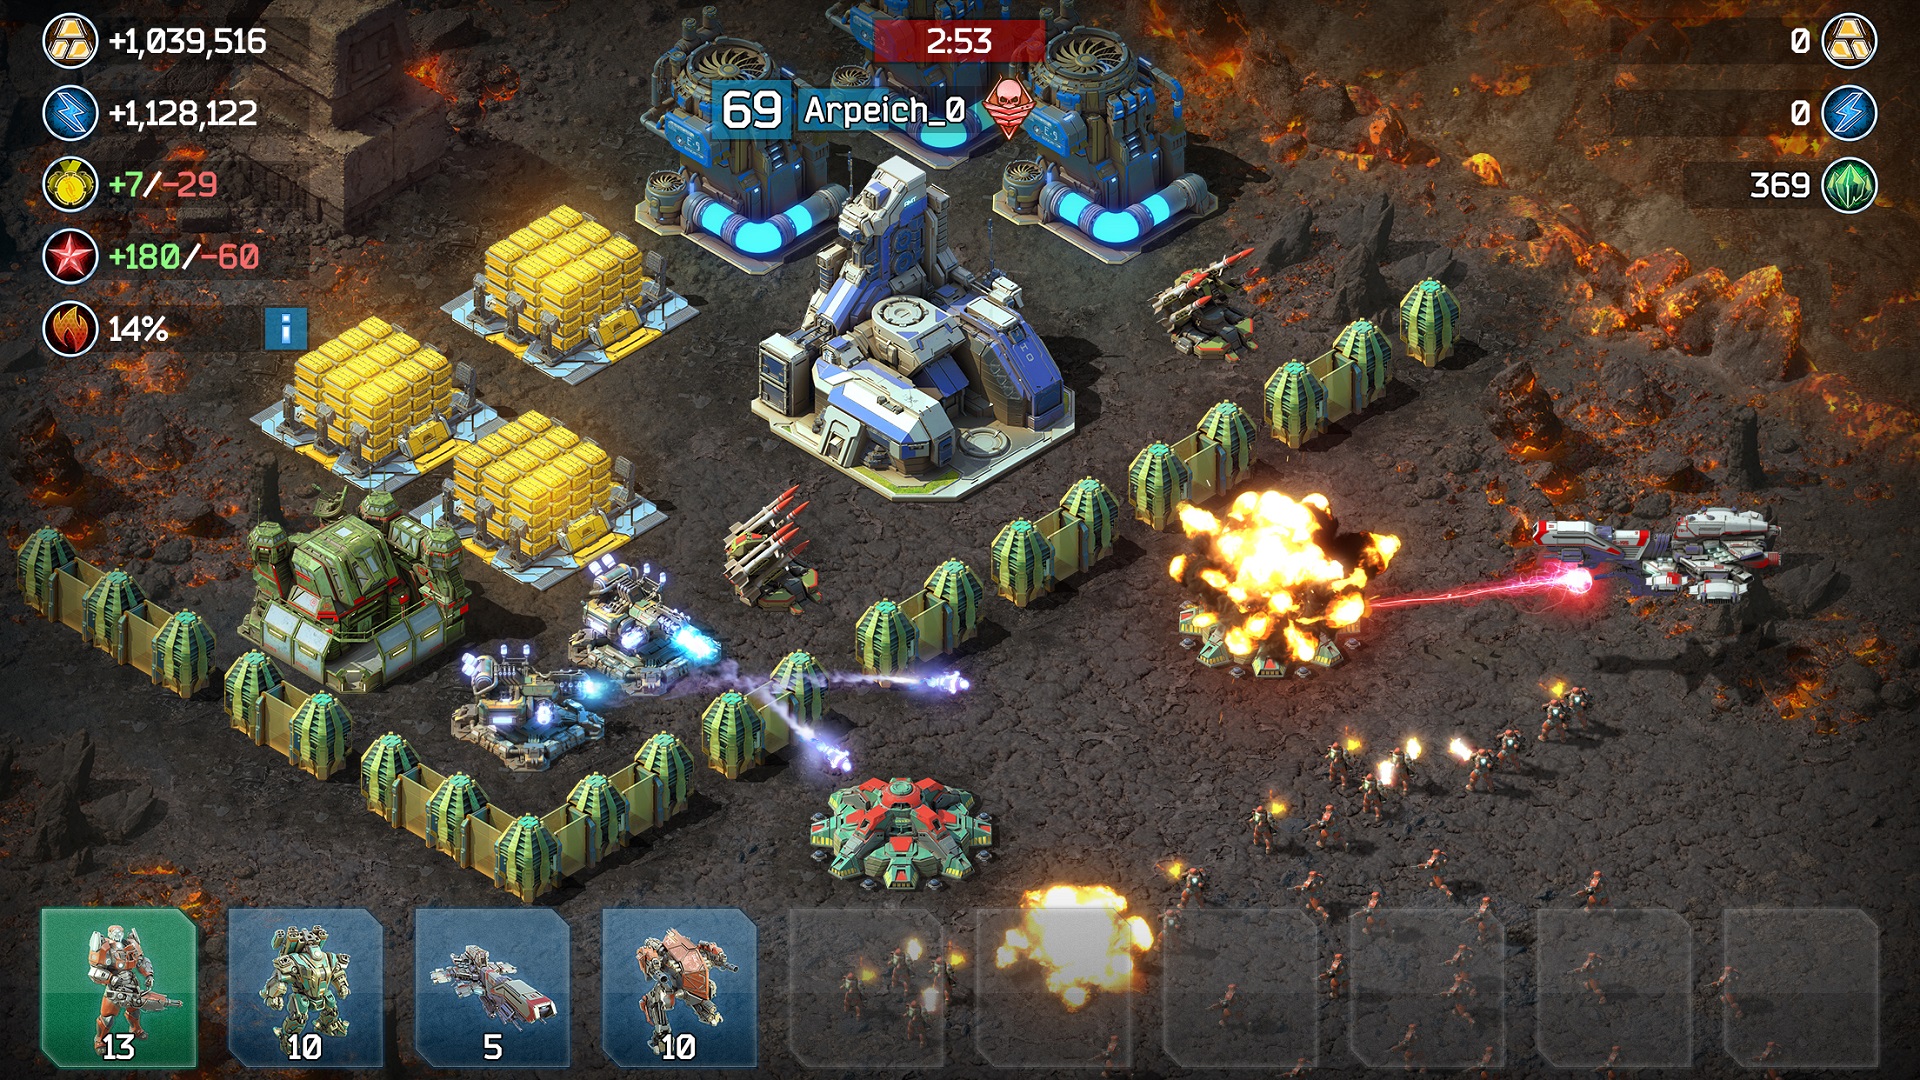 Battle for the Galaxy - strategia gra MMORTS roboty